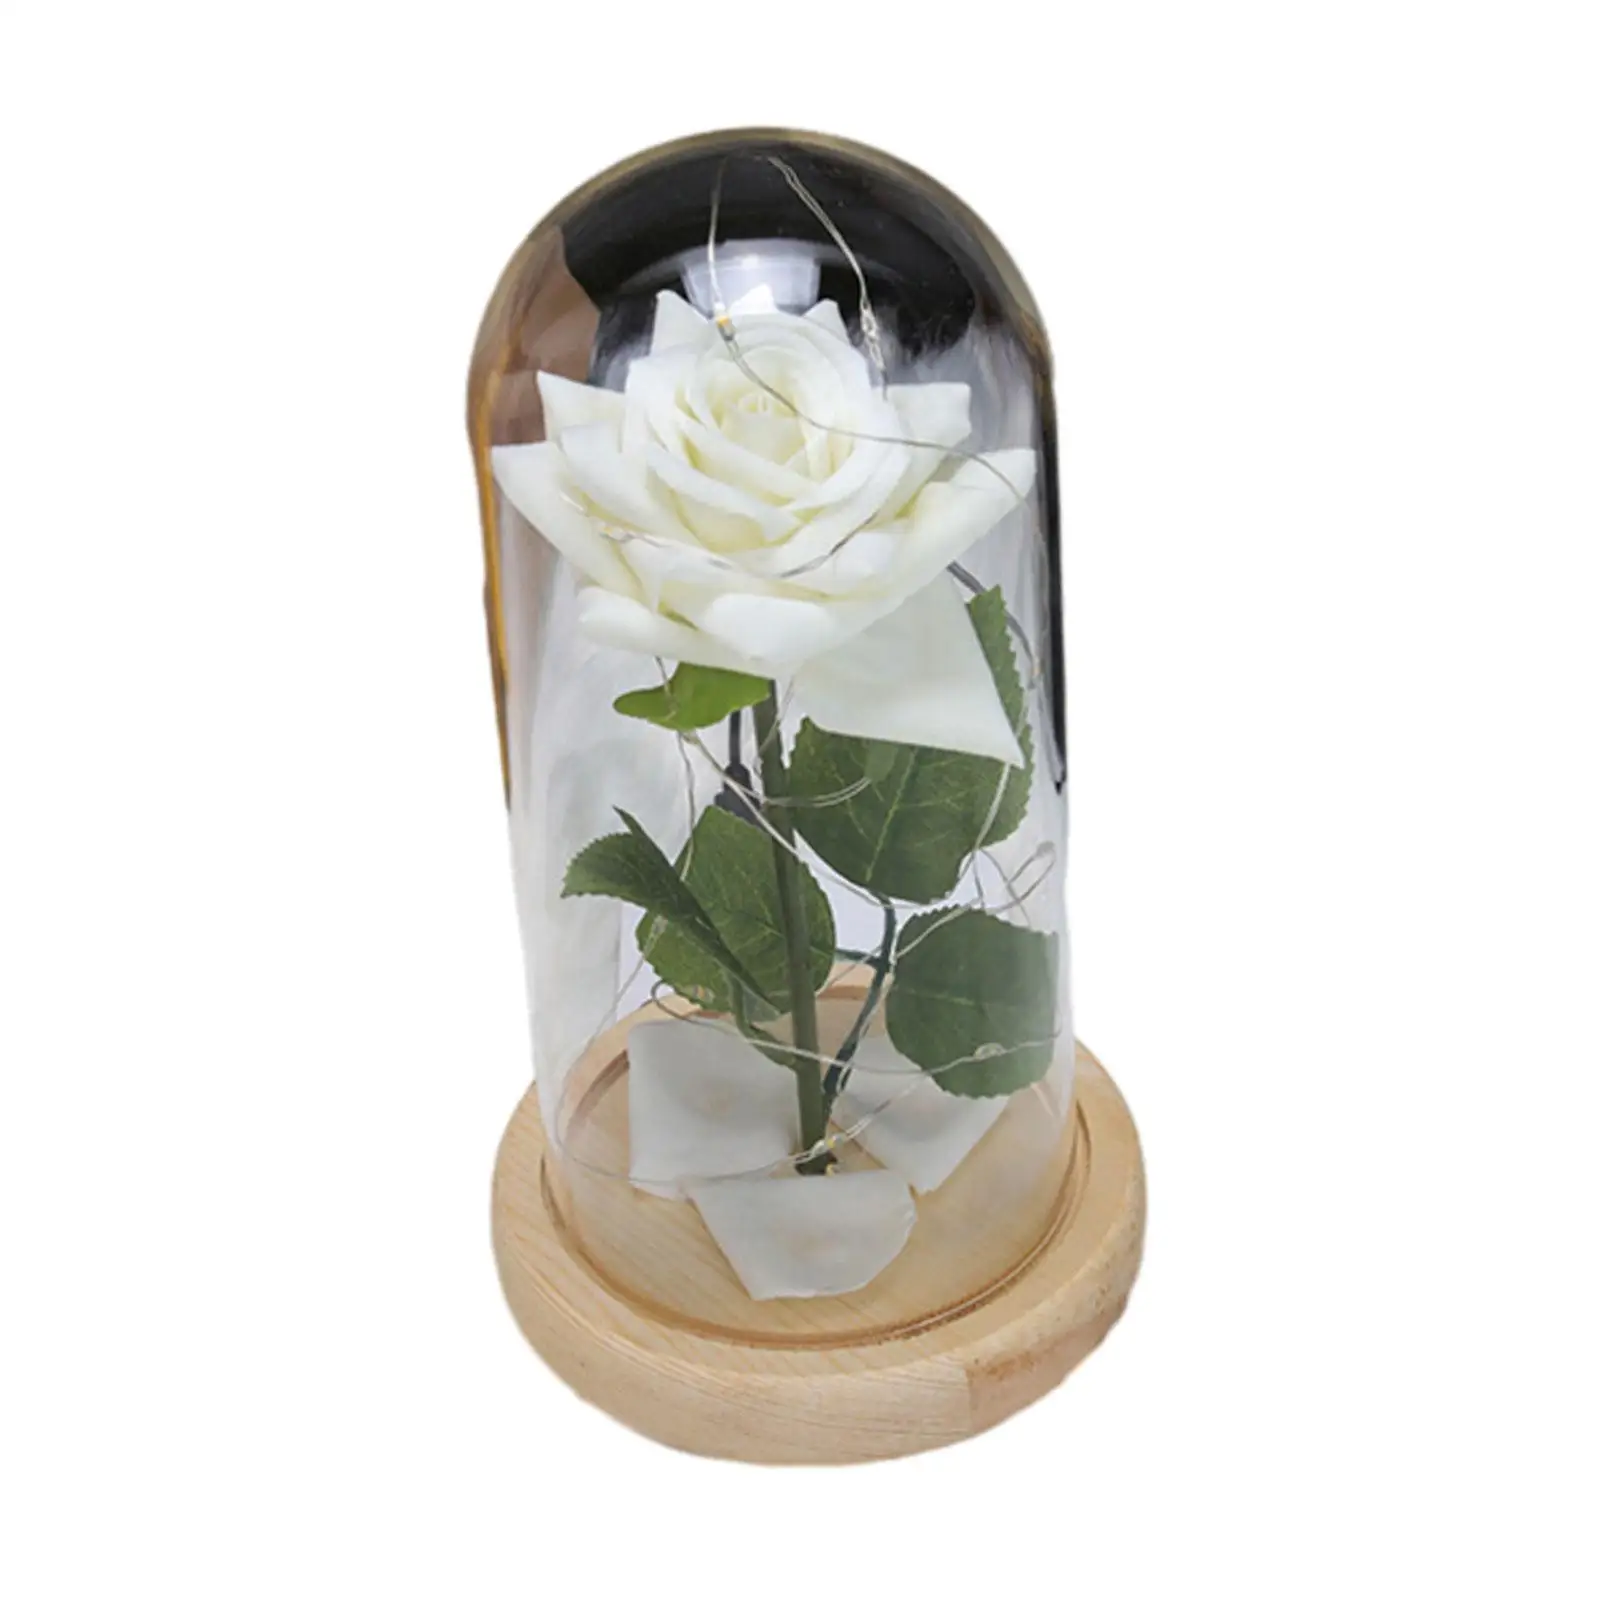 Glass Rose Flower Gift Valentines Decor Alentines Day Gifts for Him Eternal Flower Glass Cover Crafts Rose Flower in Dome Glass